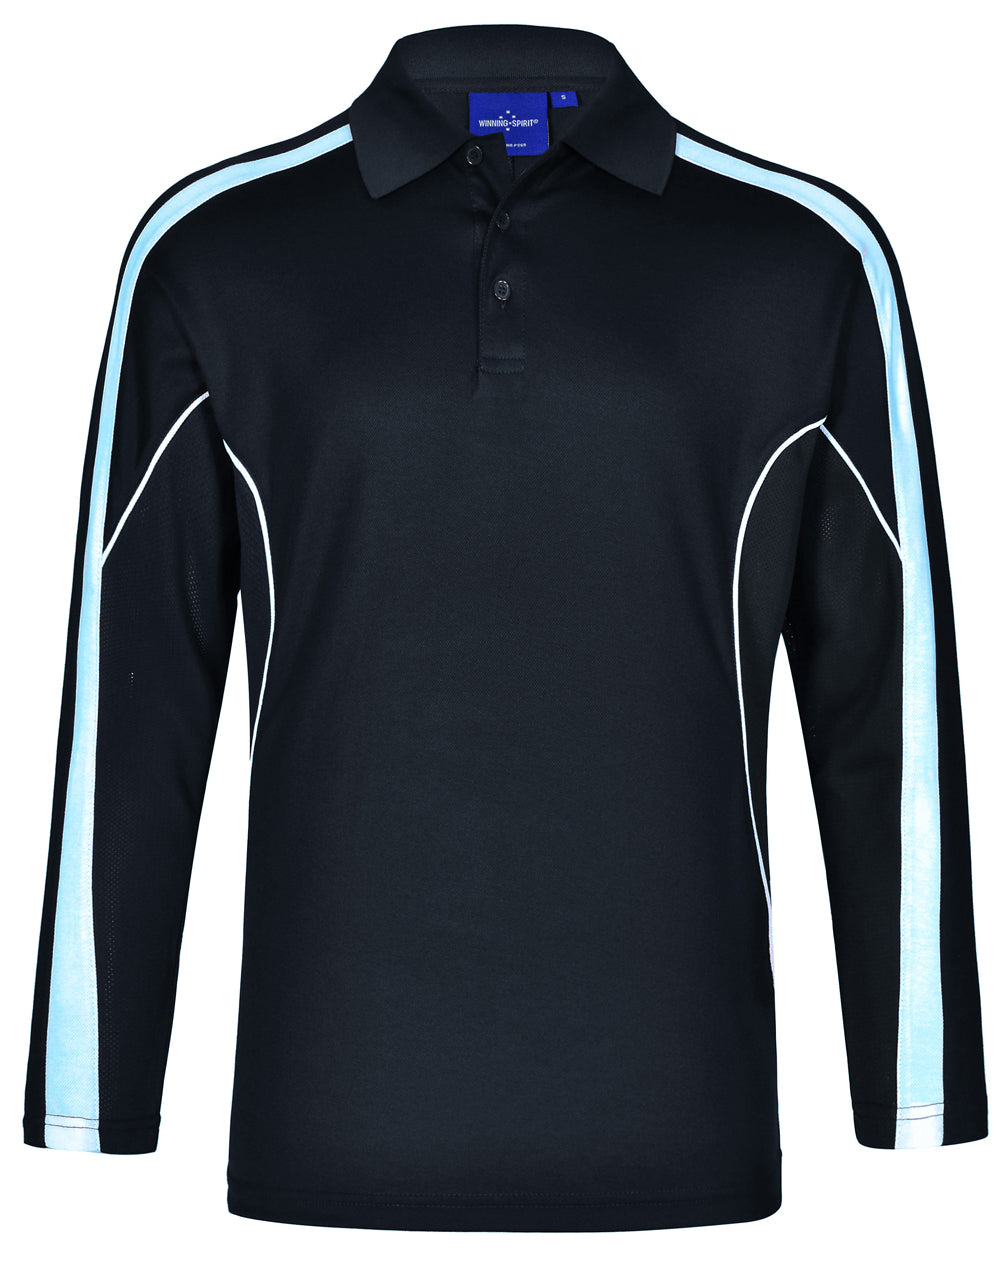 a black and white polo shirt with a blue stripe